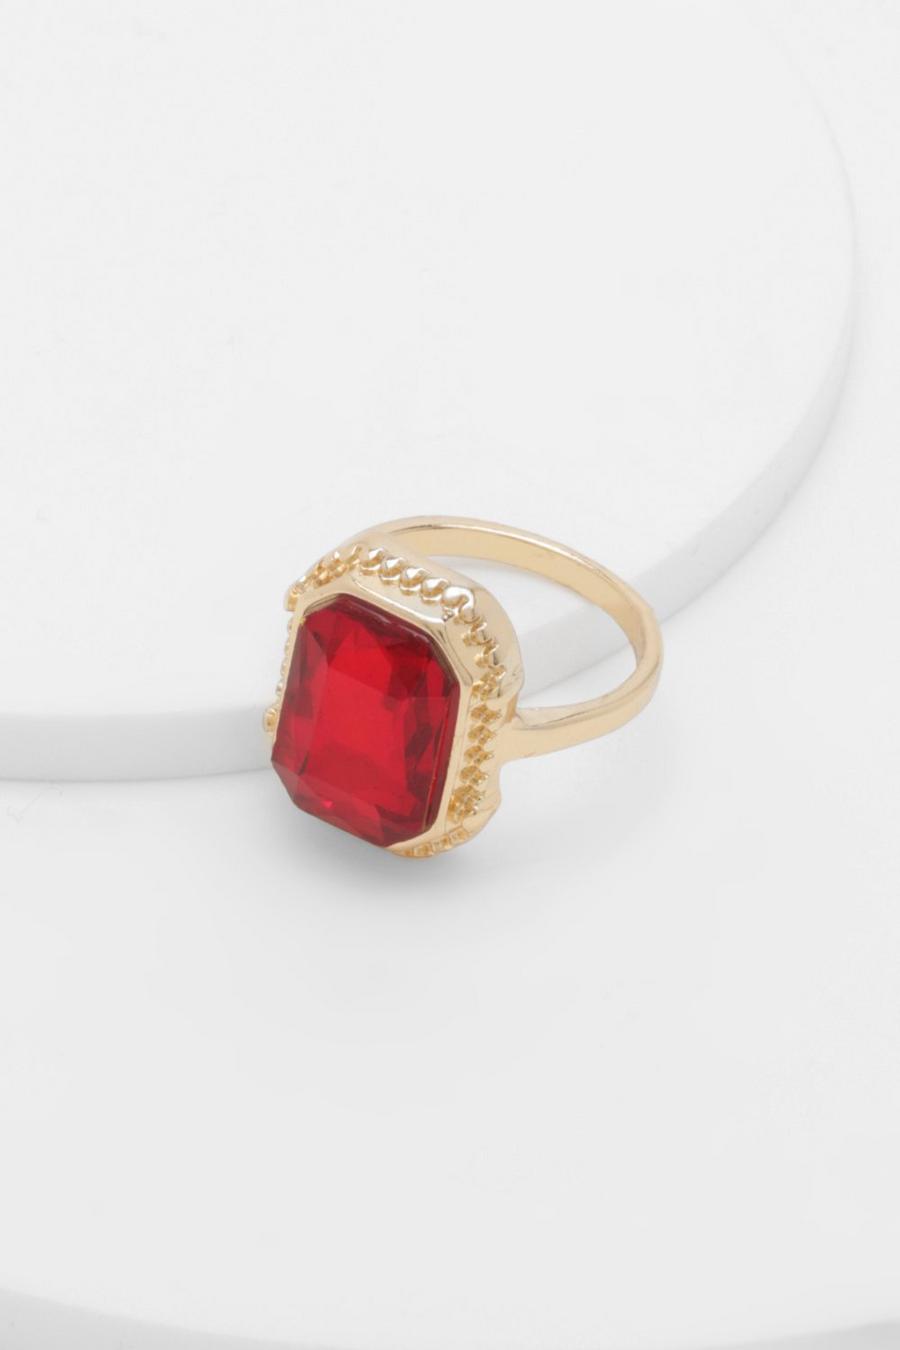 Statement Signiture Red Stone Ring